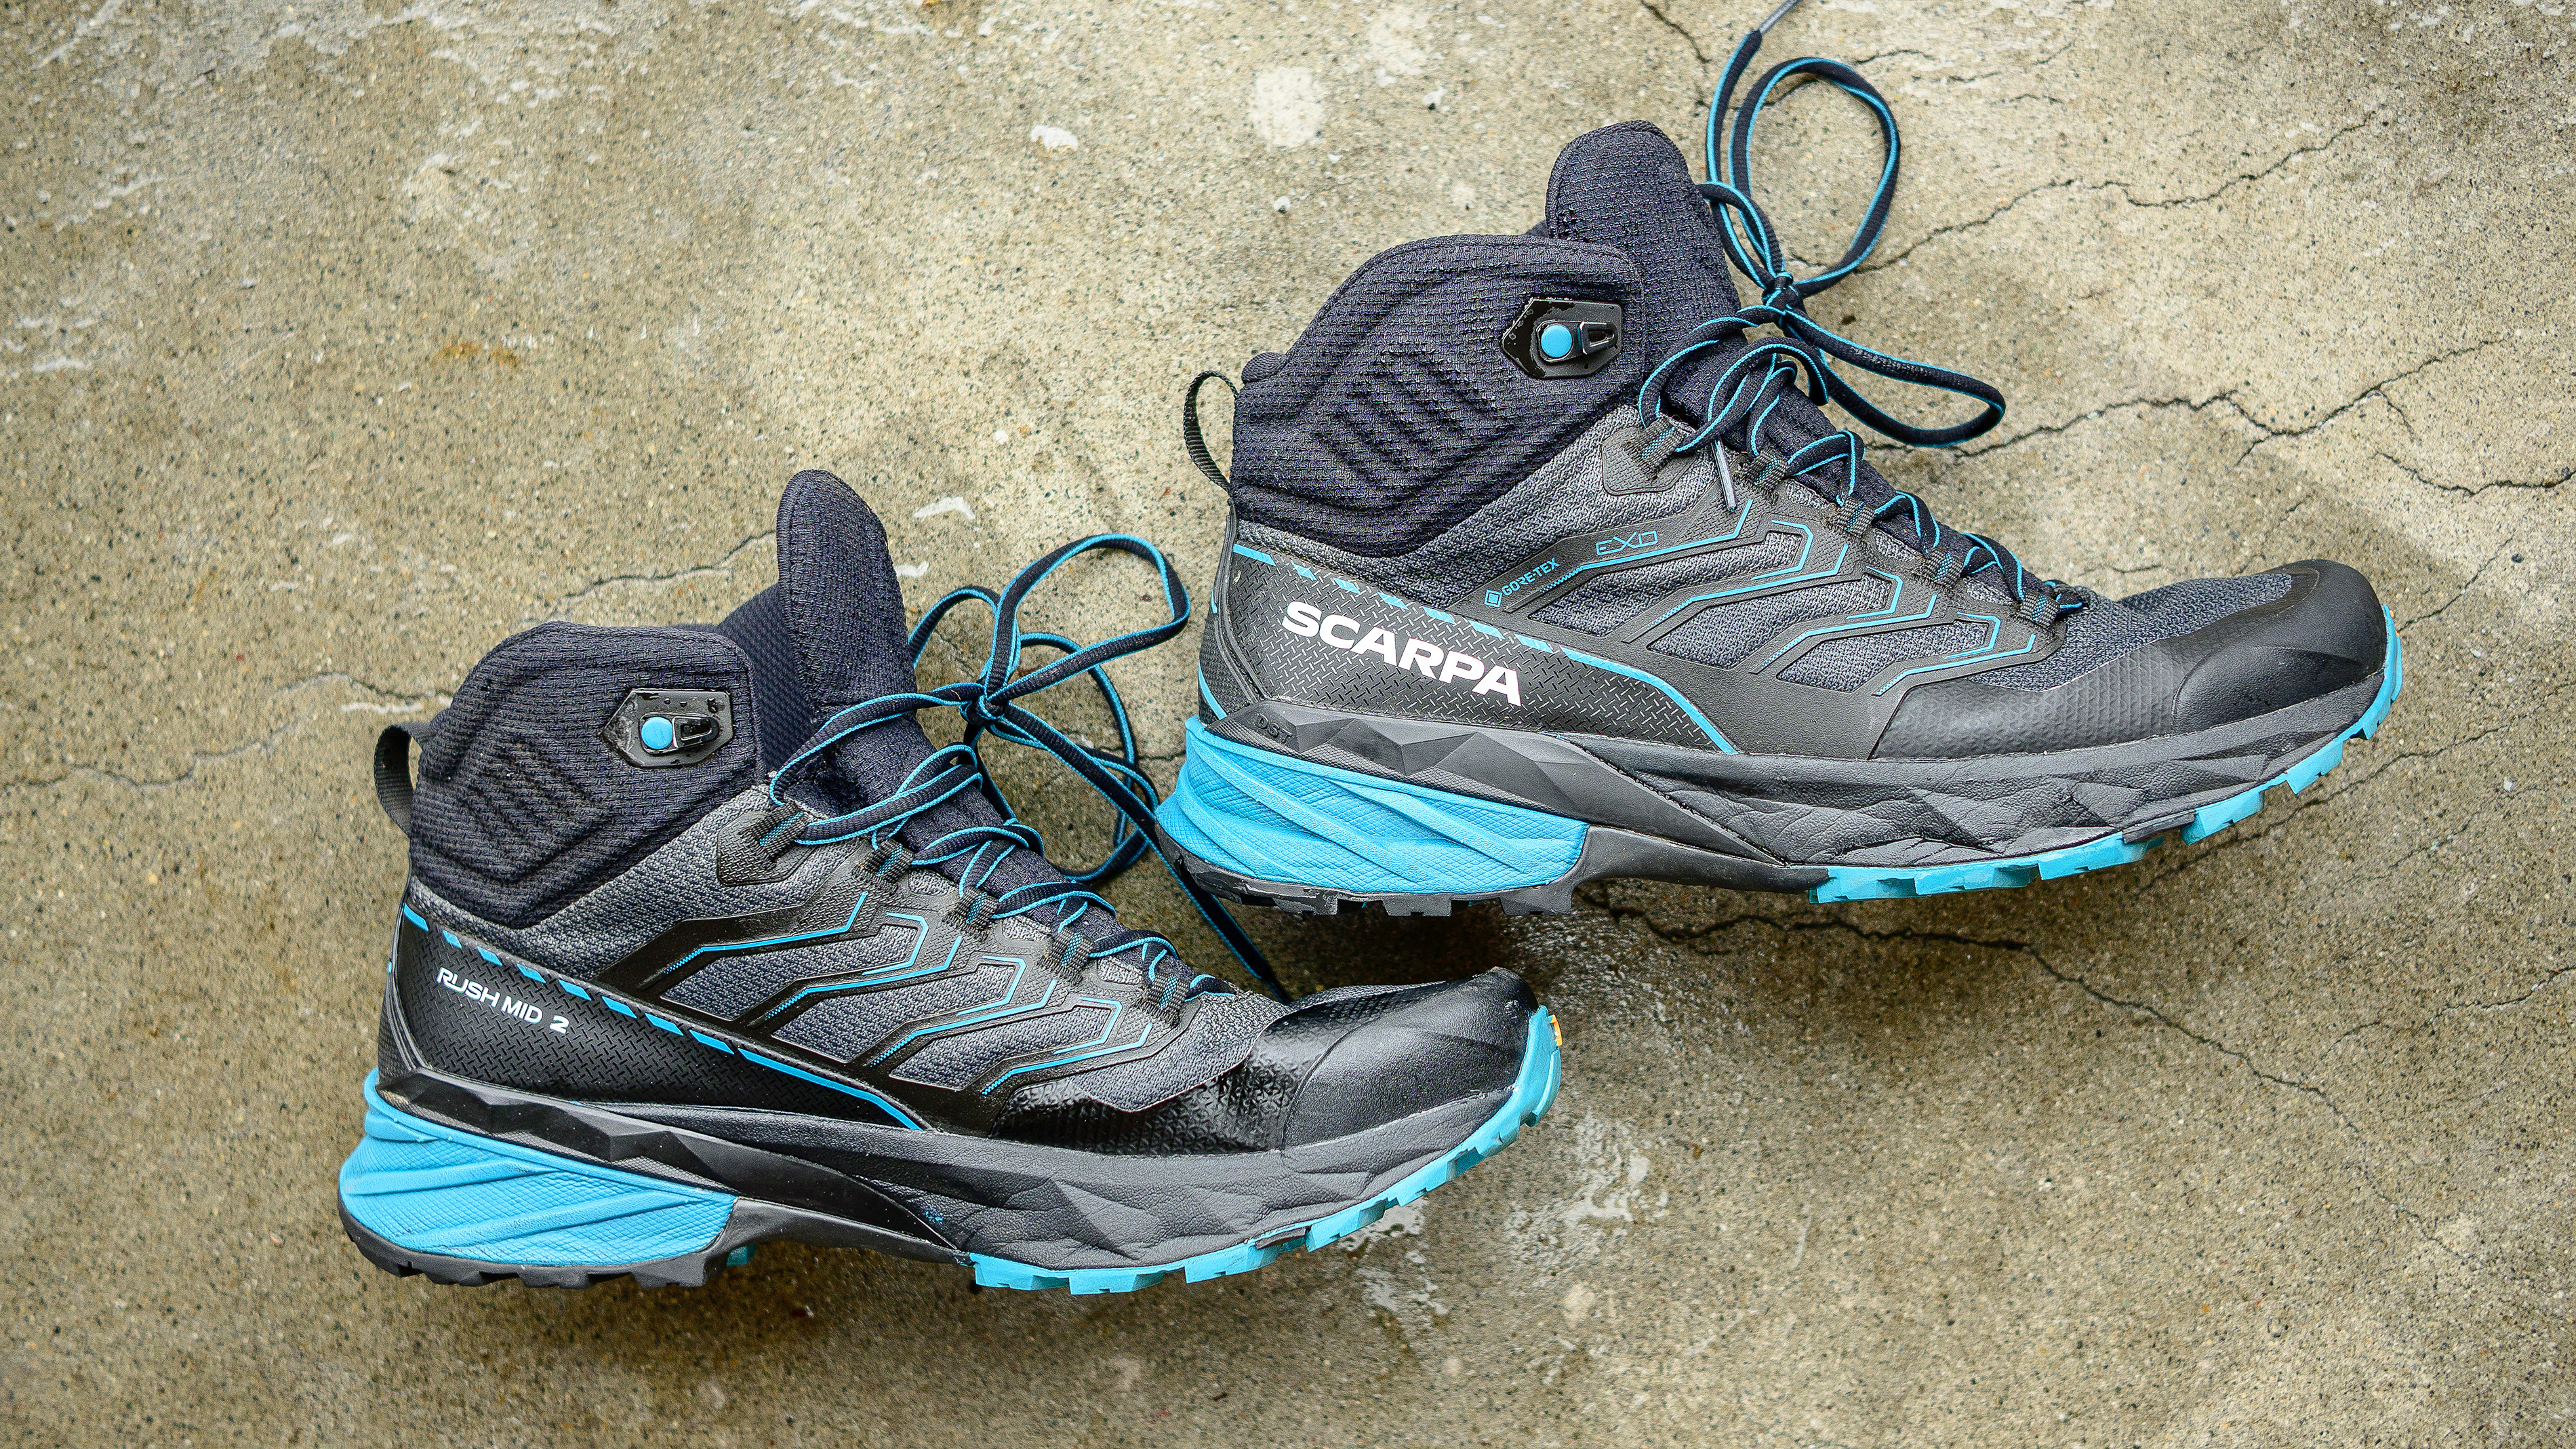 Scarpa Rush 2 Mid GTX hiking boots laying on the floor